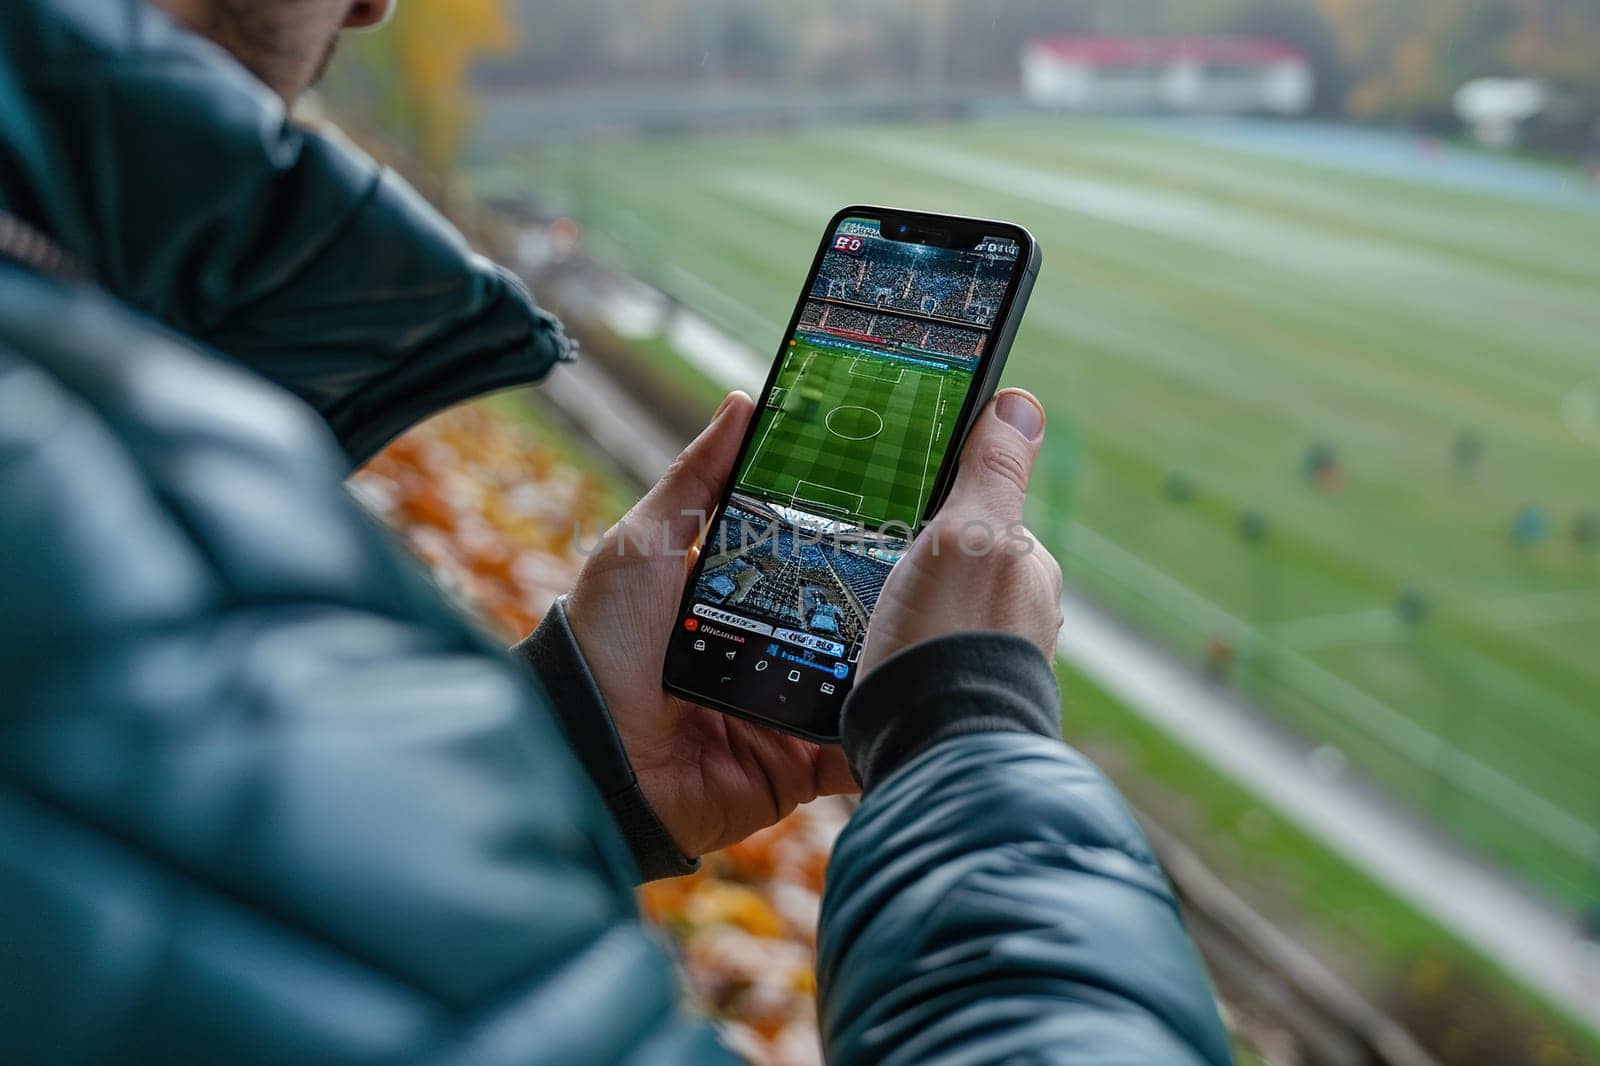 A man with a mobile phone in his hands watches an online football broadcast at the stadium. Concept of sports applications on mobile devices.